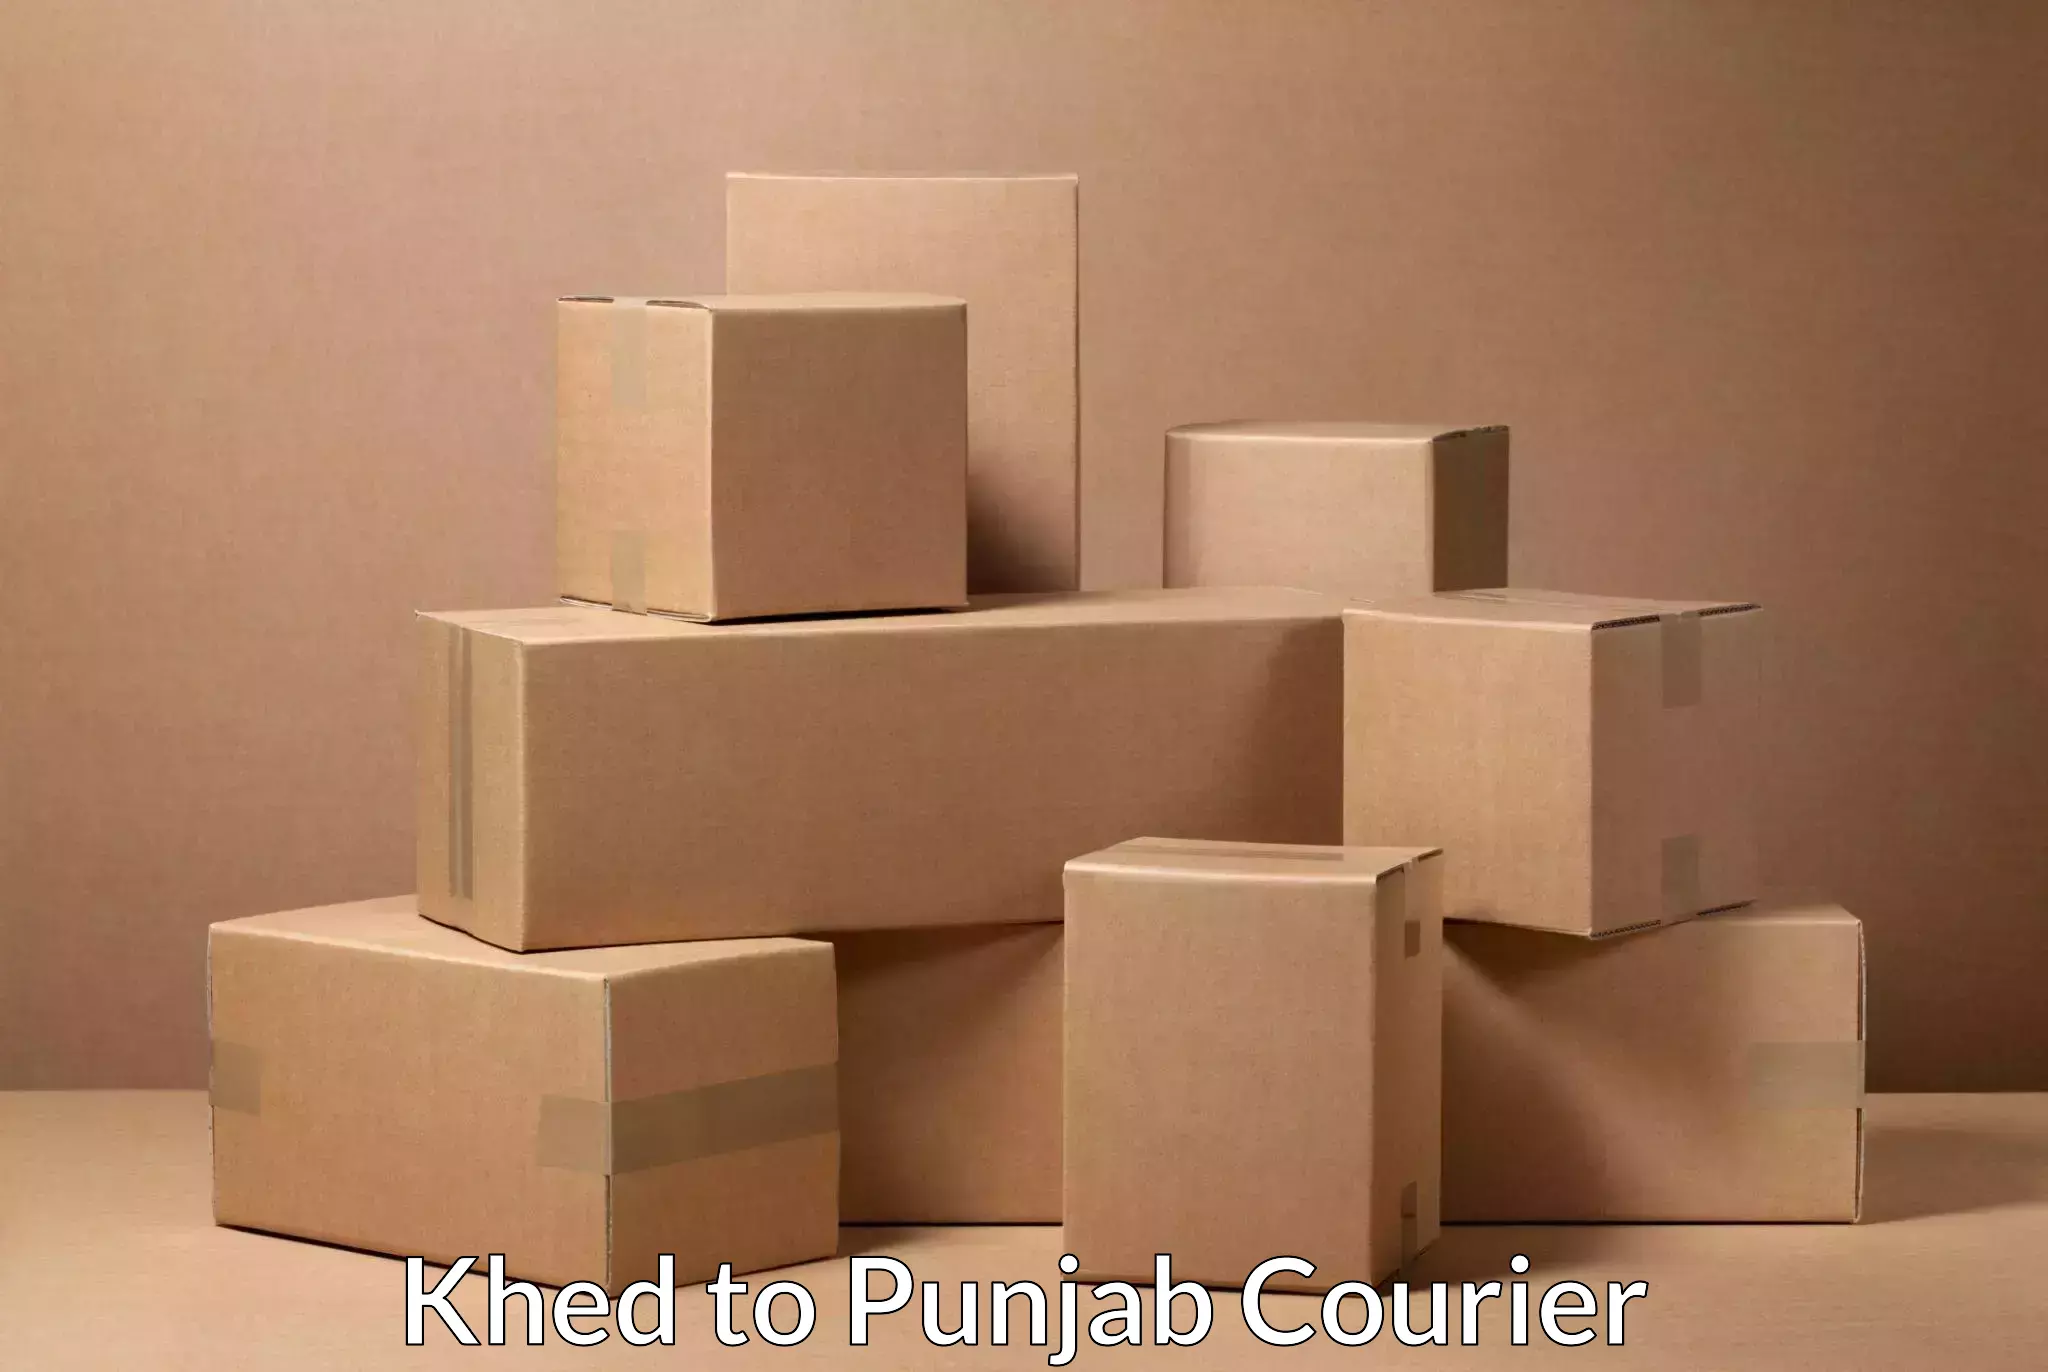 Global shipping solutions Khed to Amritsar